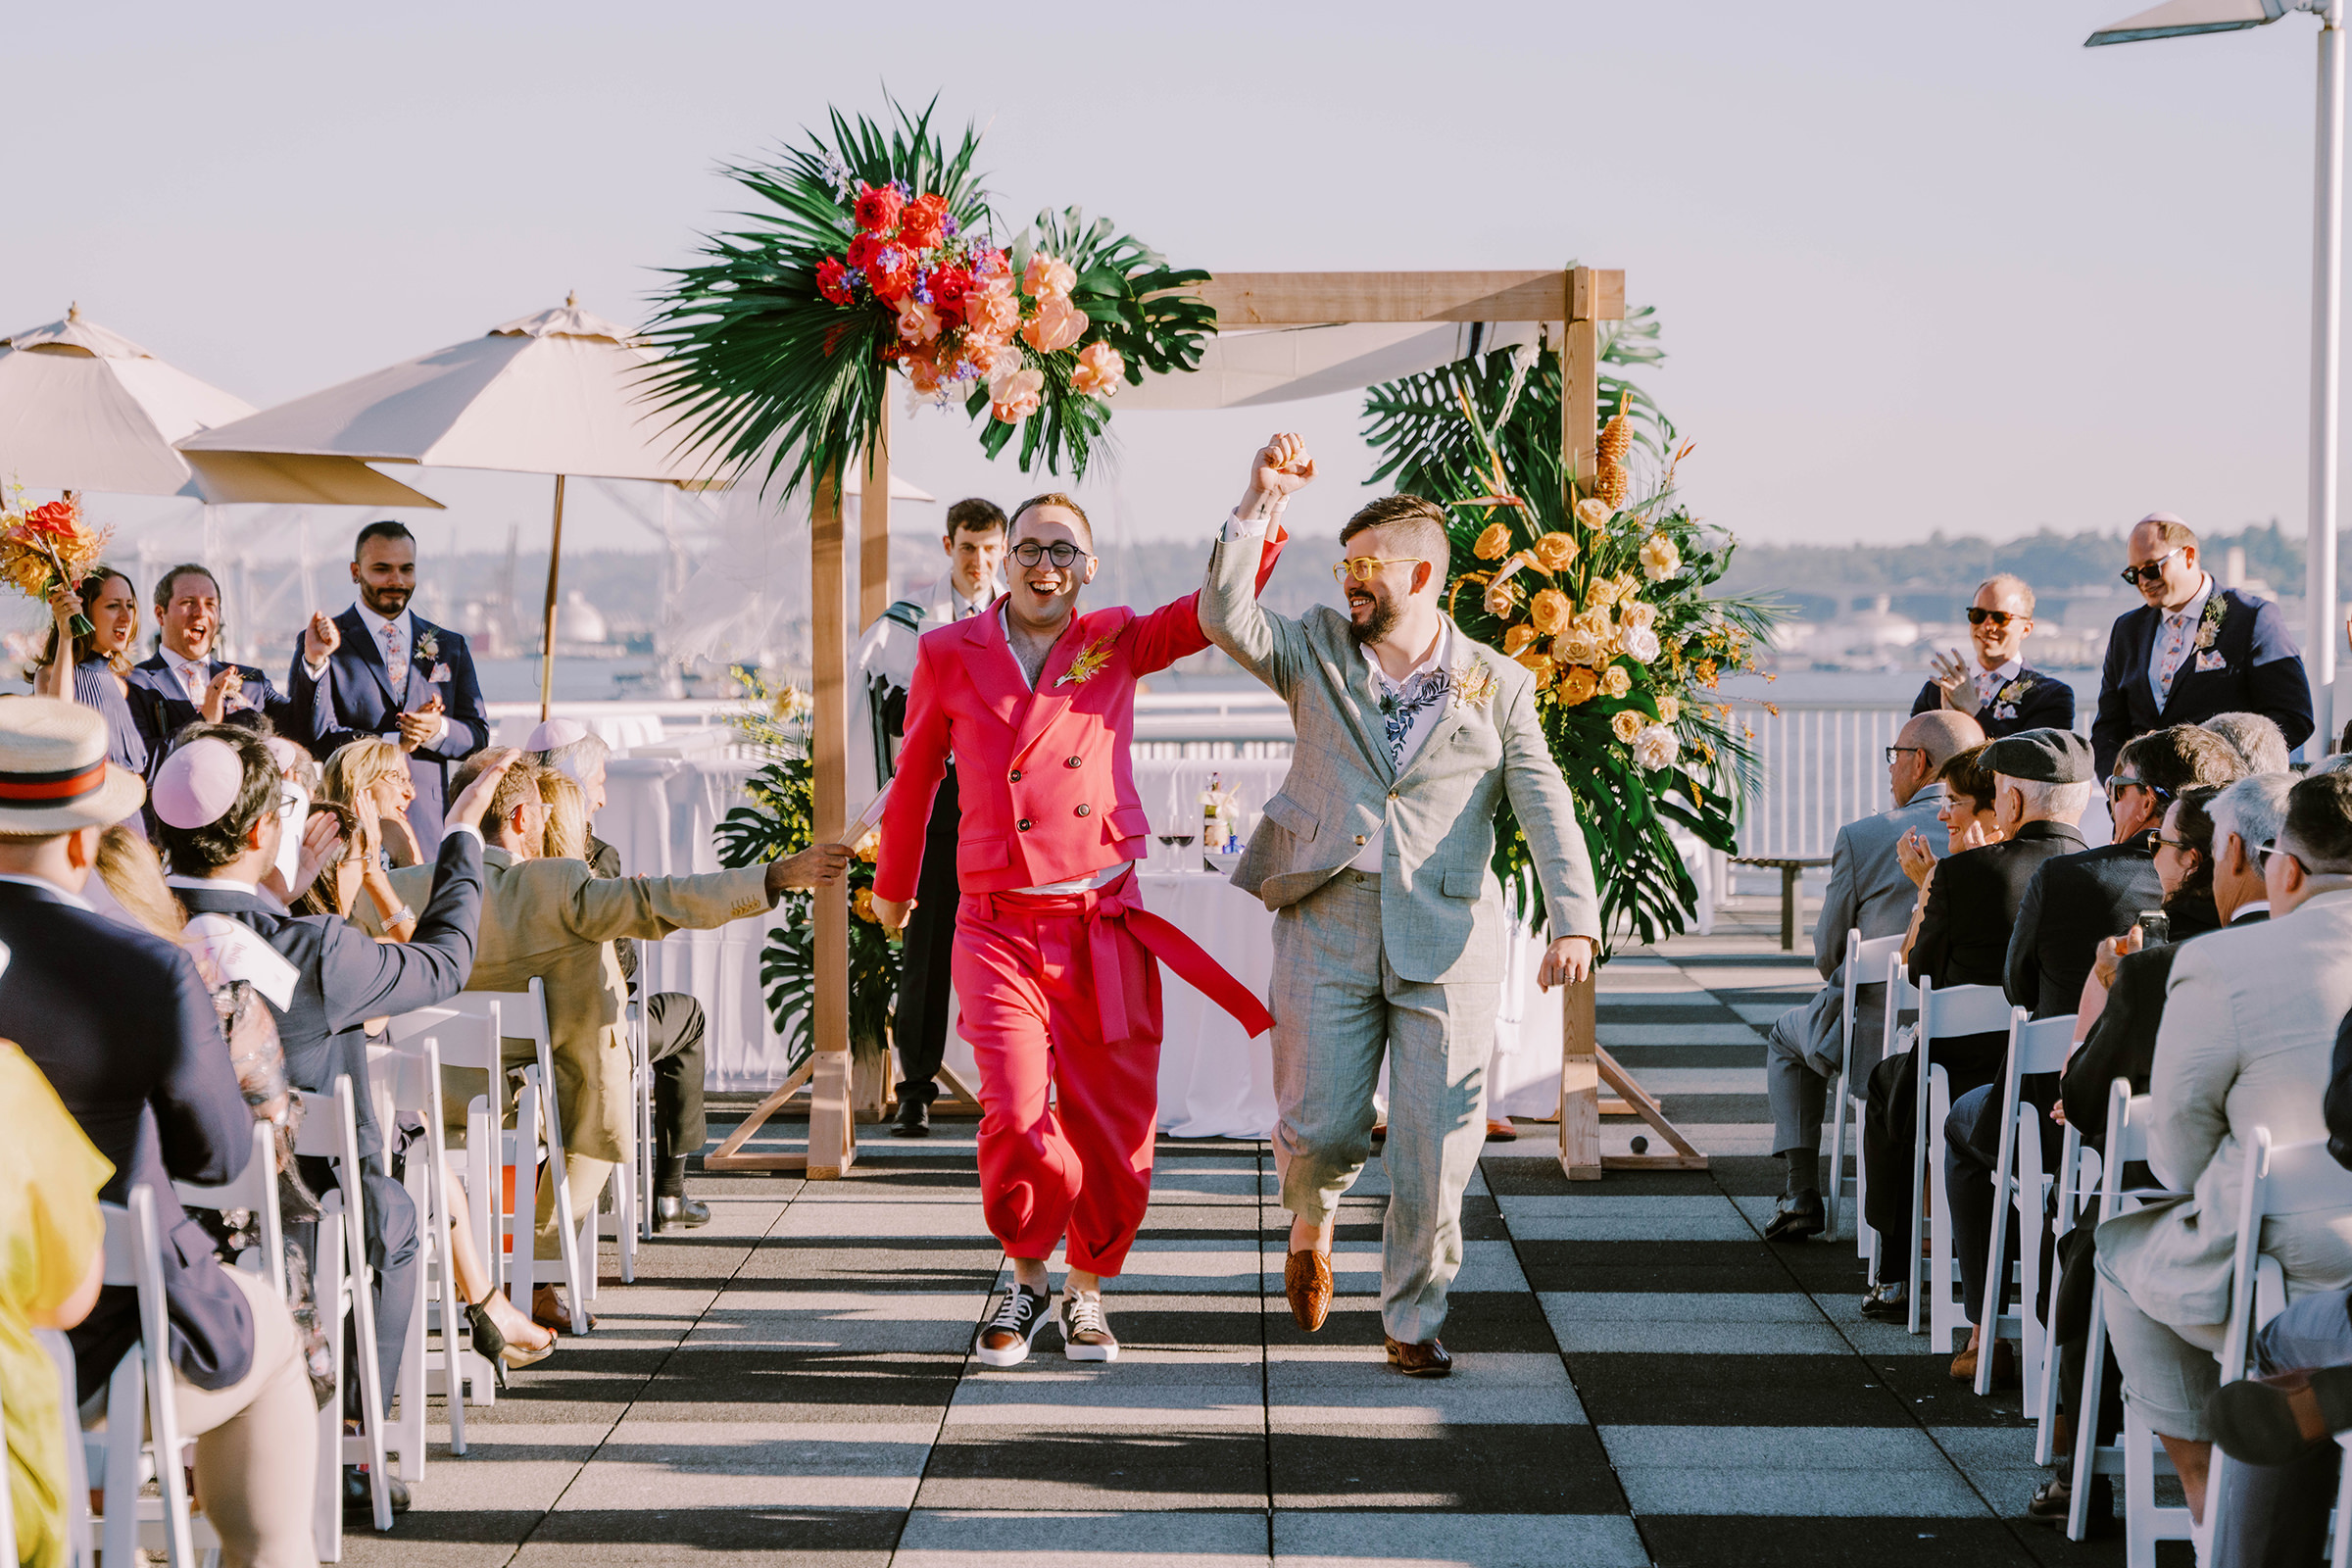 Dustin and Joey married at their Bell Harbor Conference Center rooftop wedding, summer 2022